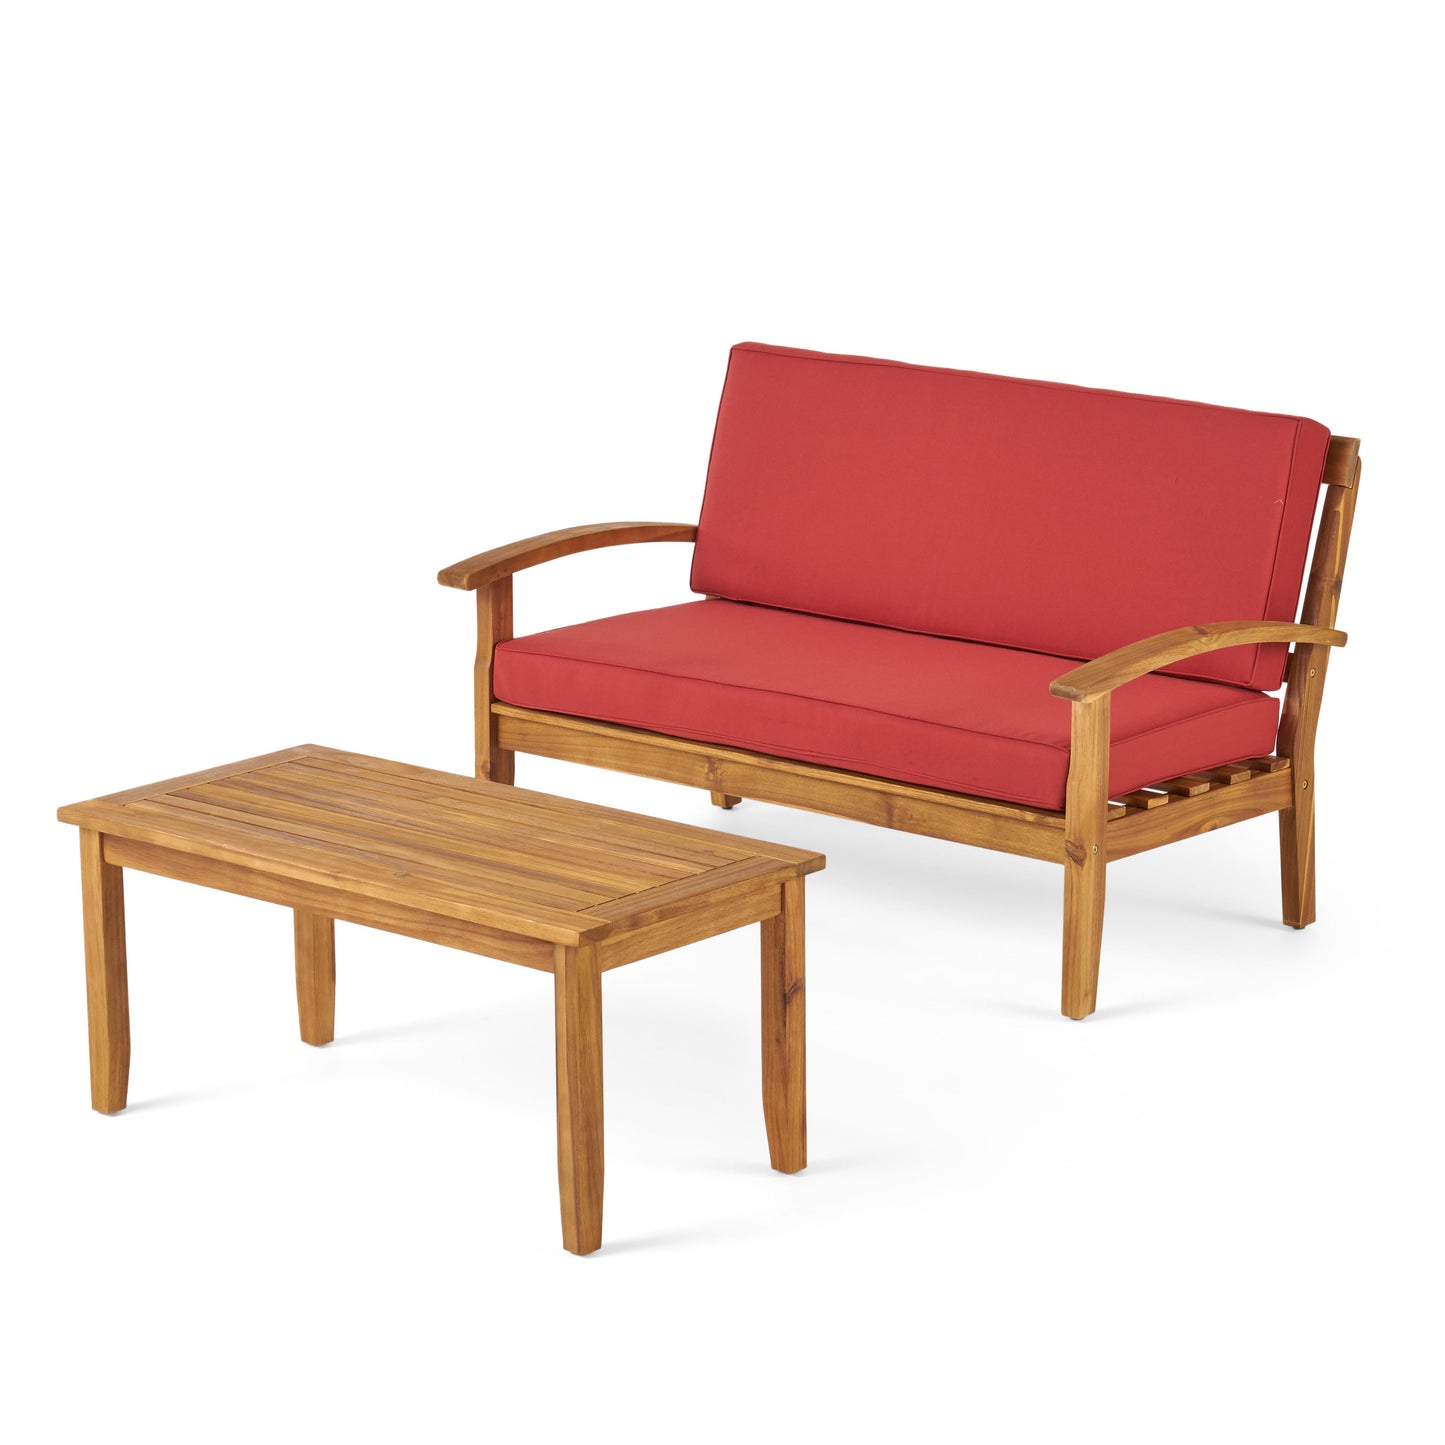 Keanu Outdoor Acacia Wood Loveseat and Coffee Table Set with Cushions